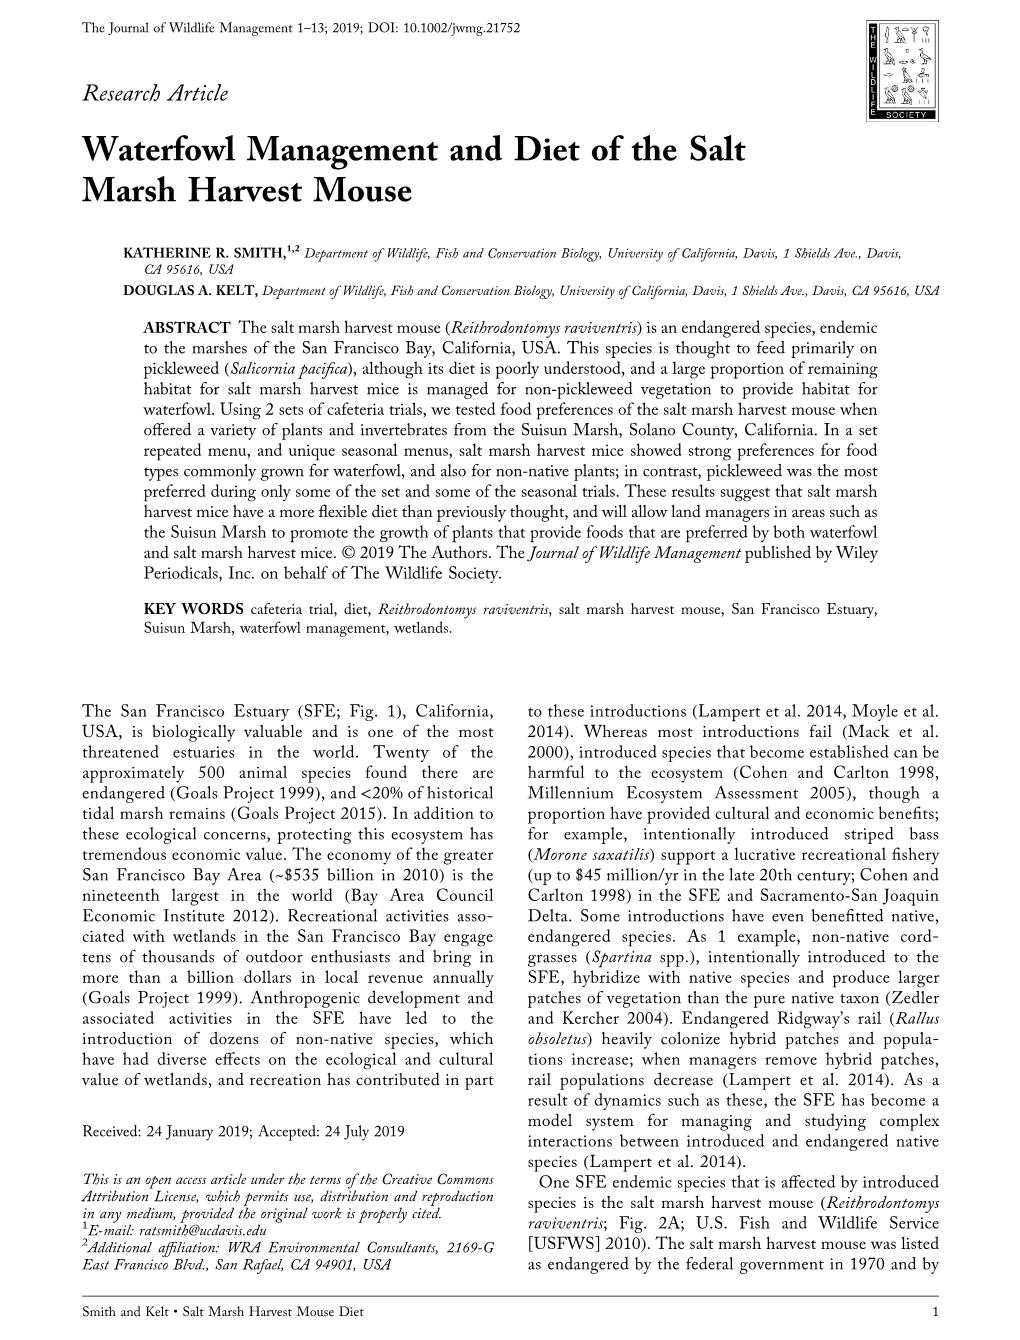 Waterfowl Management and Diet of the Salt Marsh Harvest Mouse